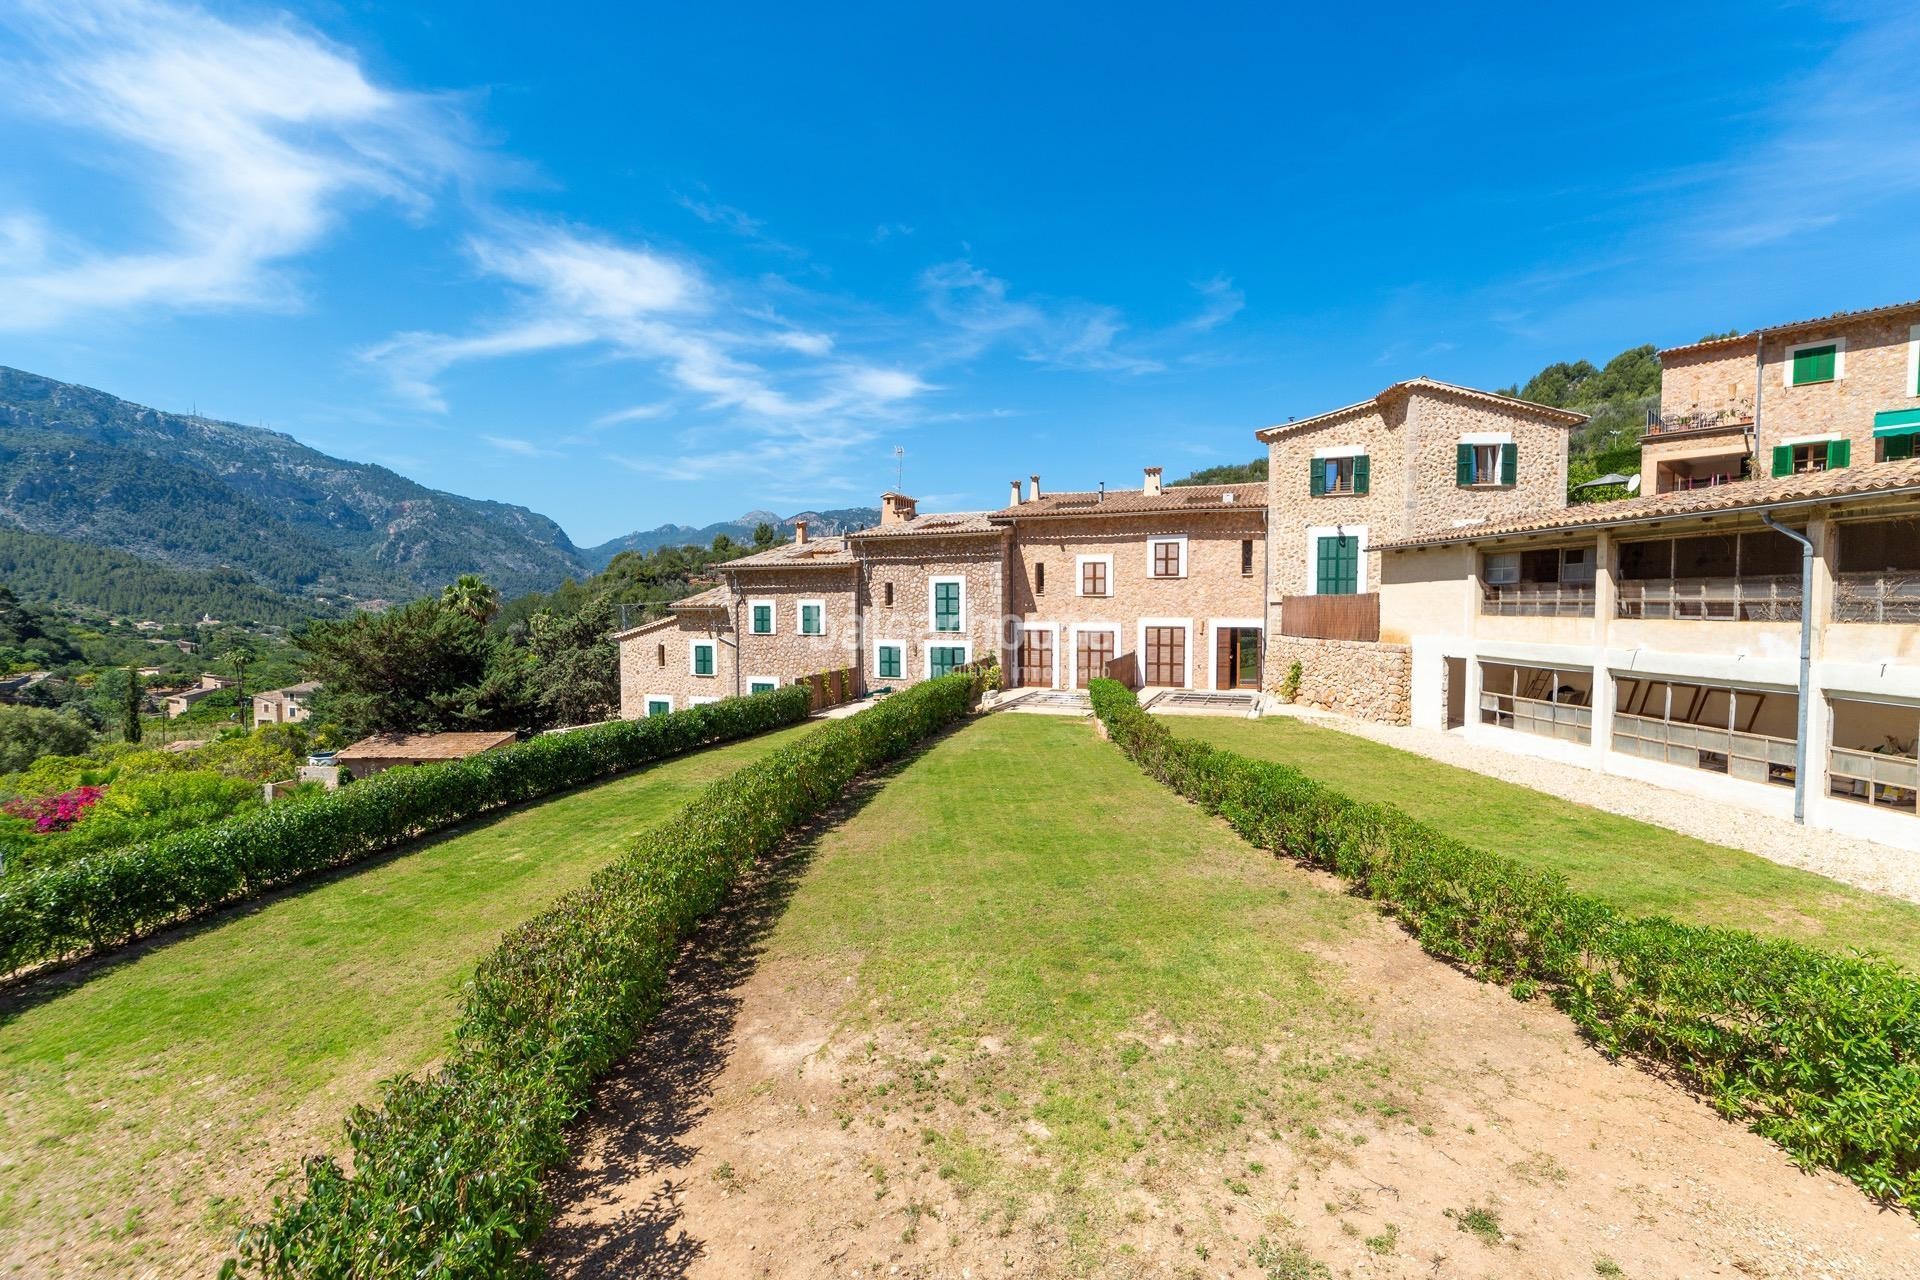 Magnificent views over the Tramuntana in this fabulous new build villa in Fornalutx